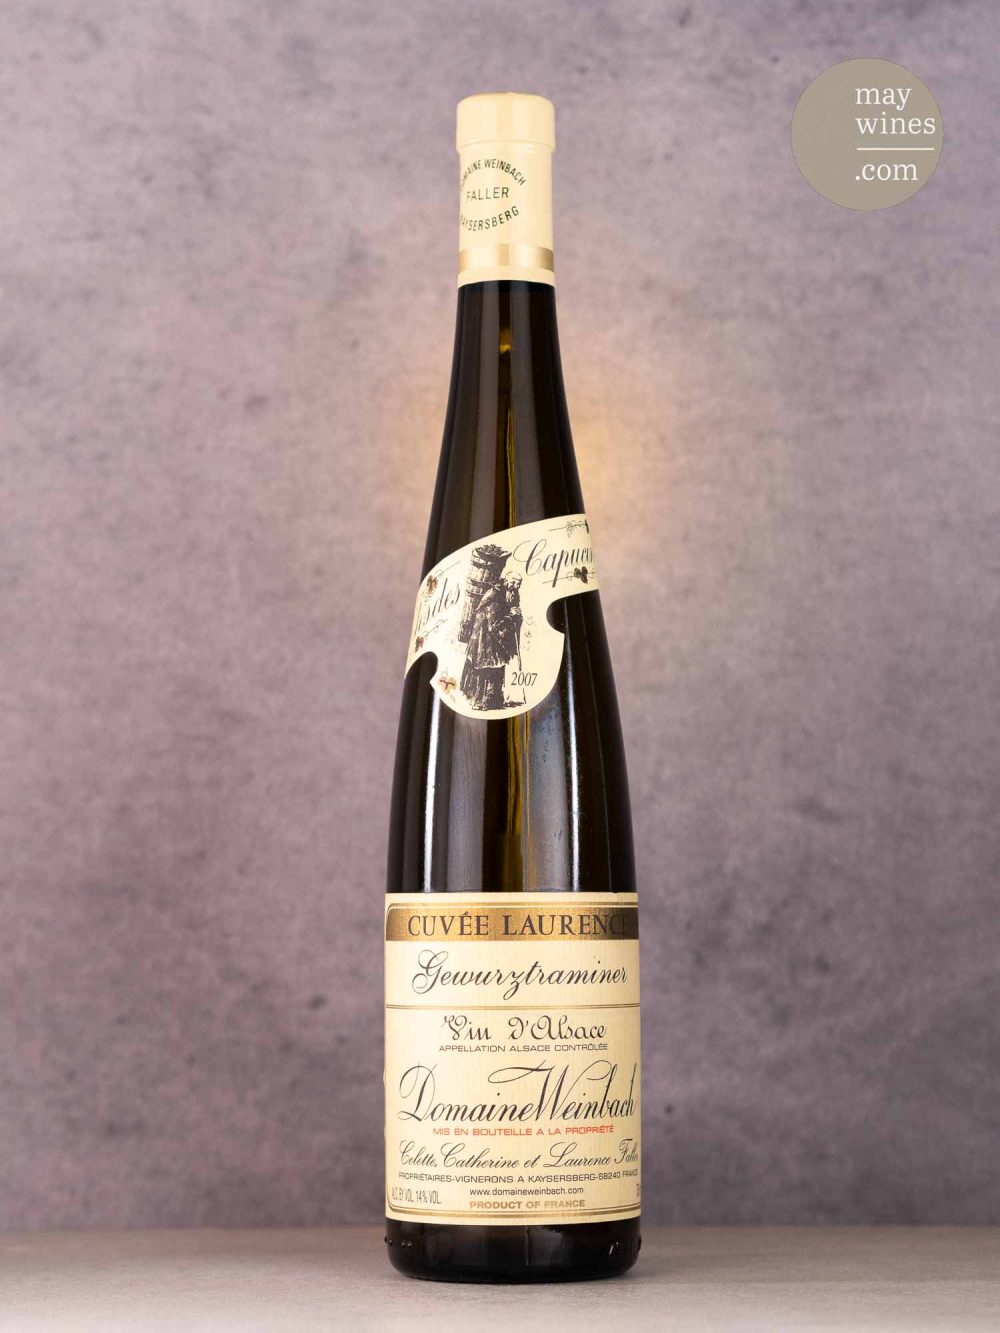 May Wines – Süßwein – 2007 Cuvée Laurence - Domaine Weinbach